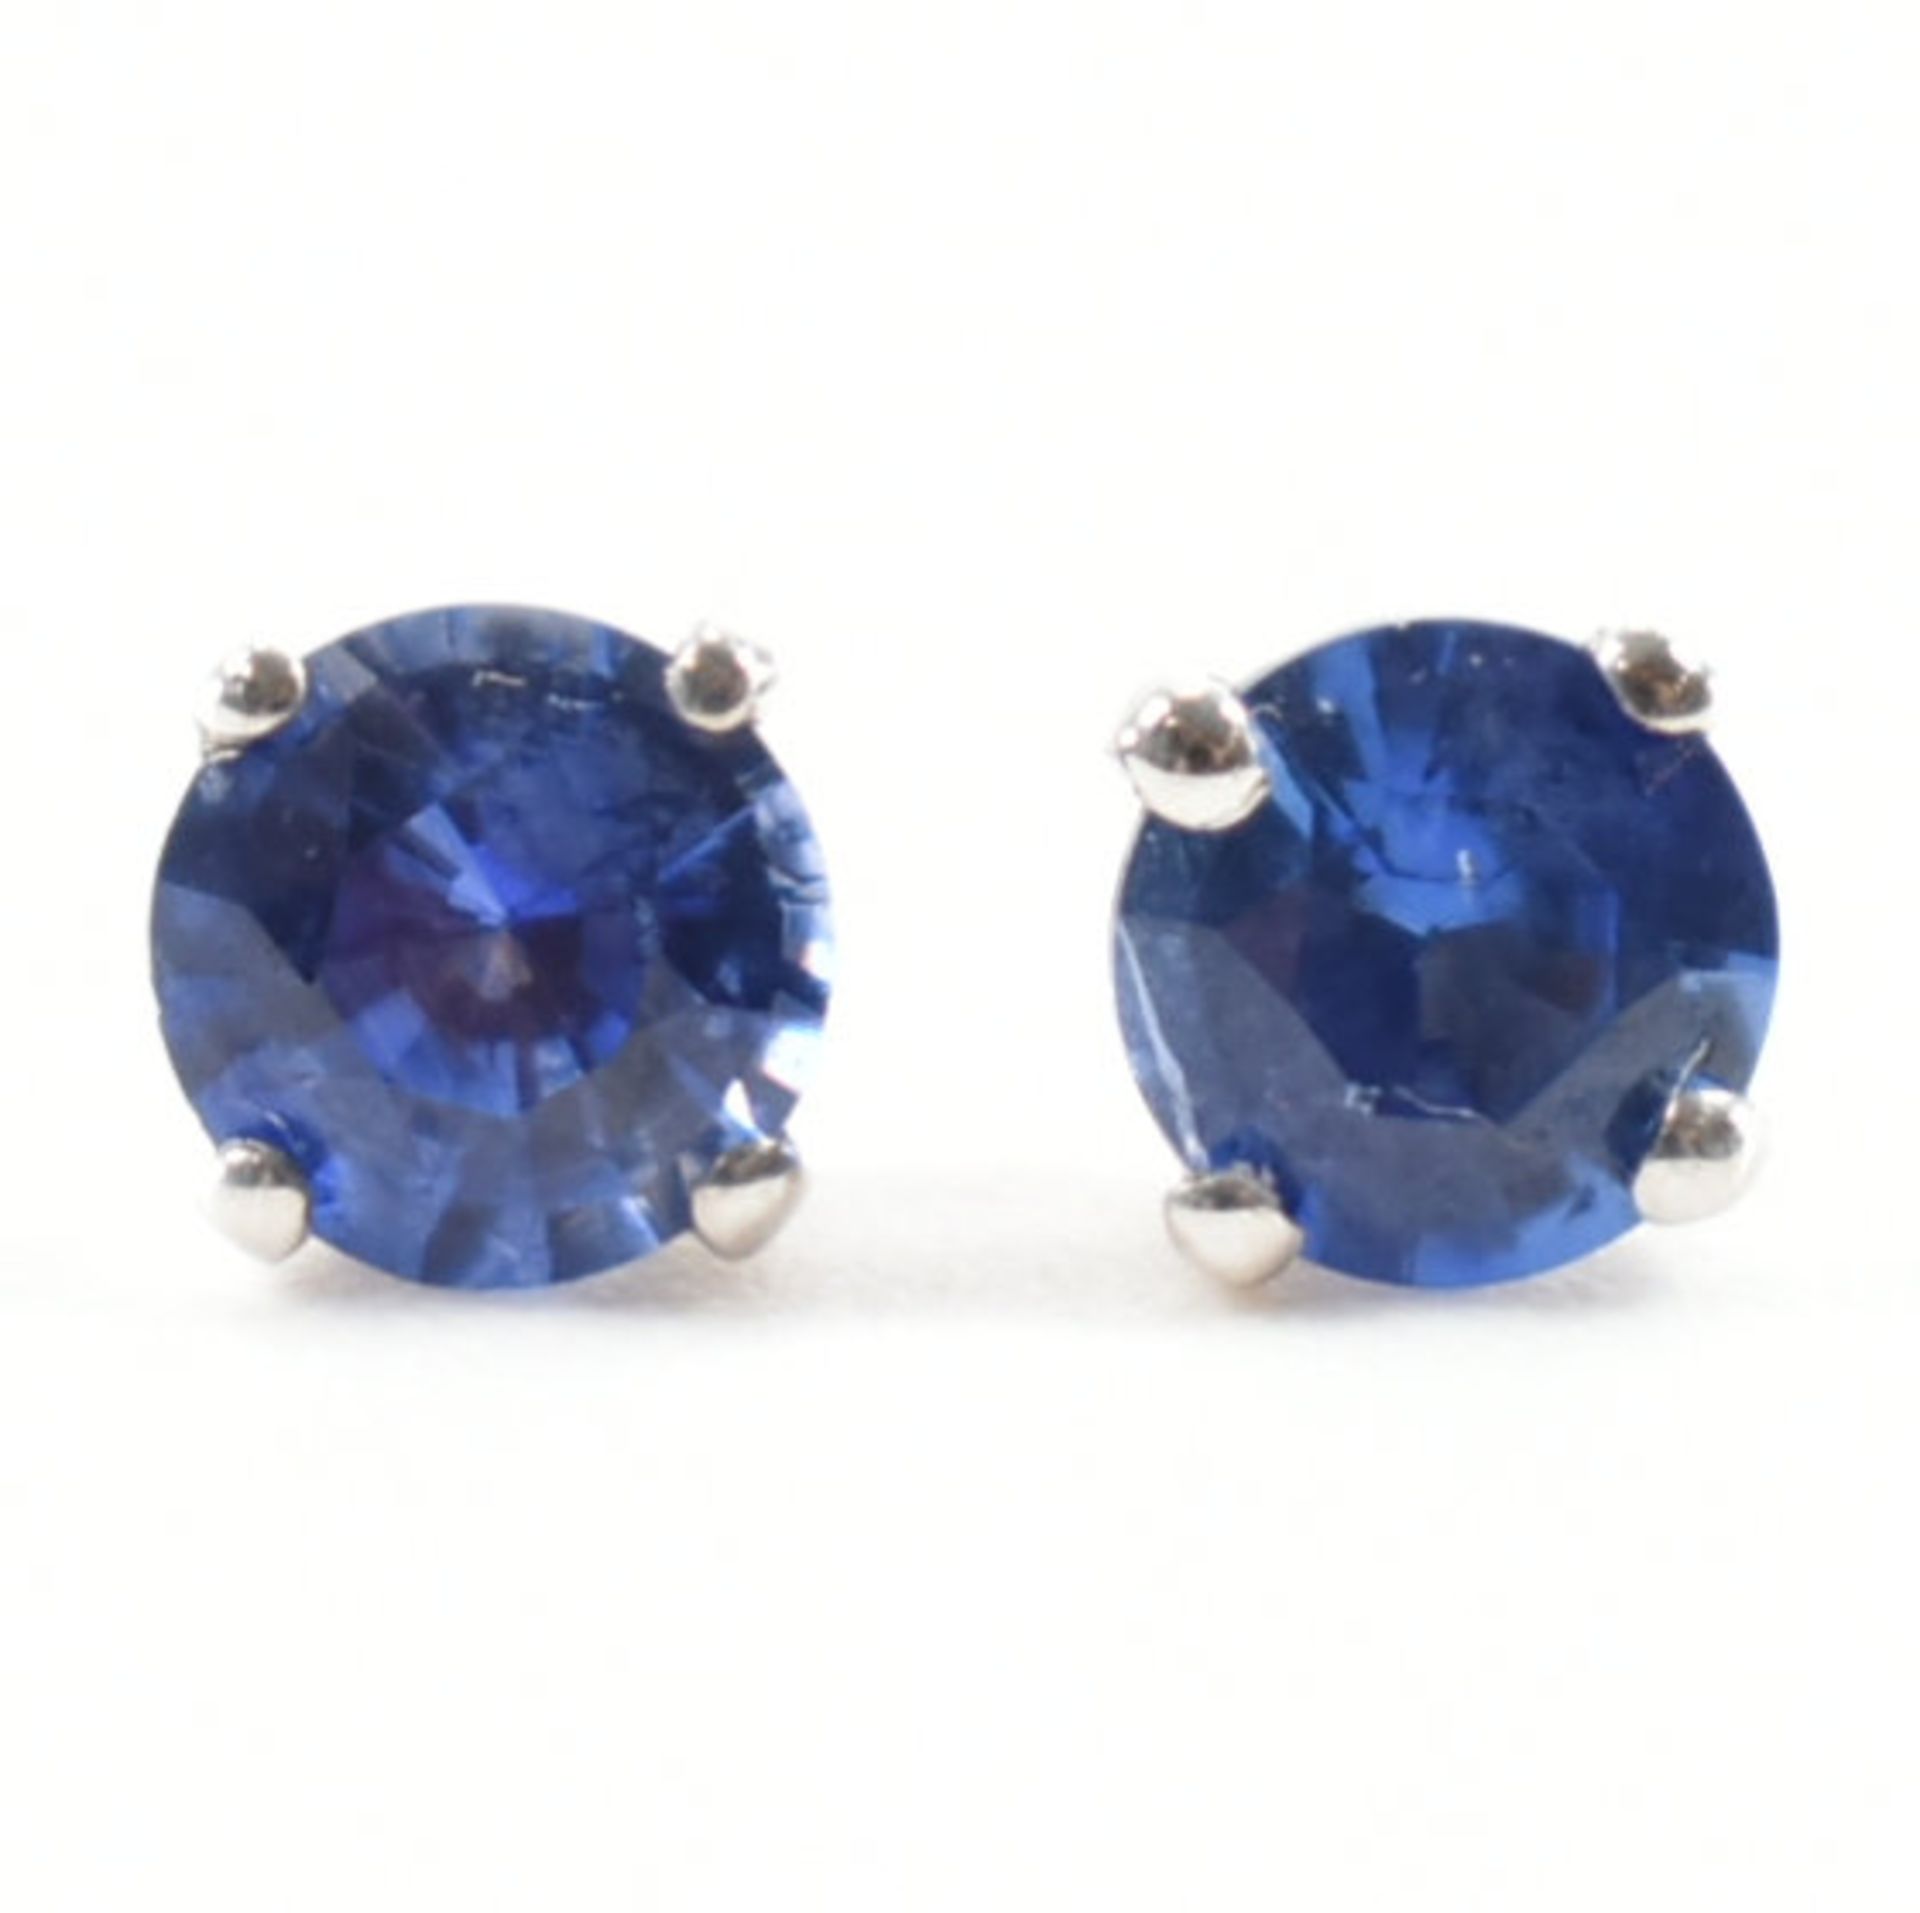 HALLMARKED 18CT WHITE GOLD & SAPPHIRE EARRINGS - Image 3 of 4